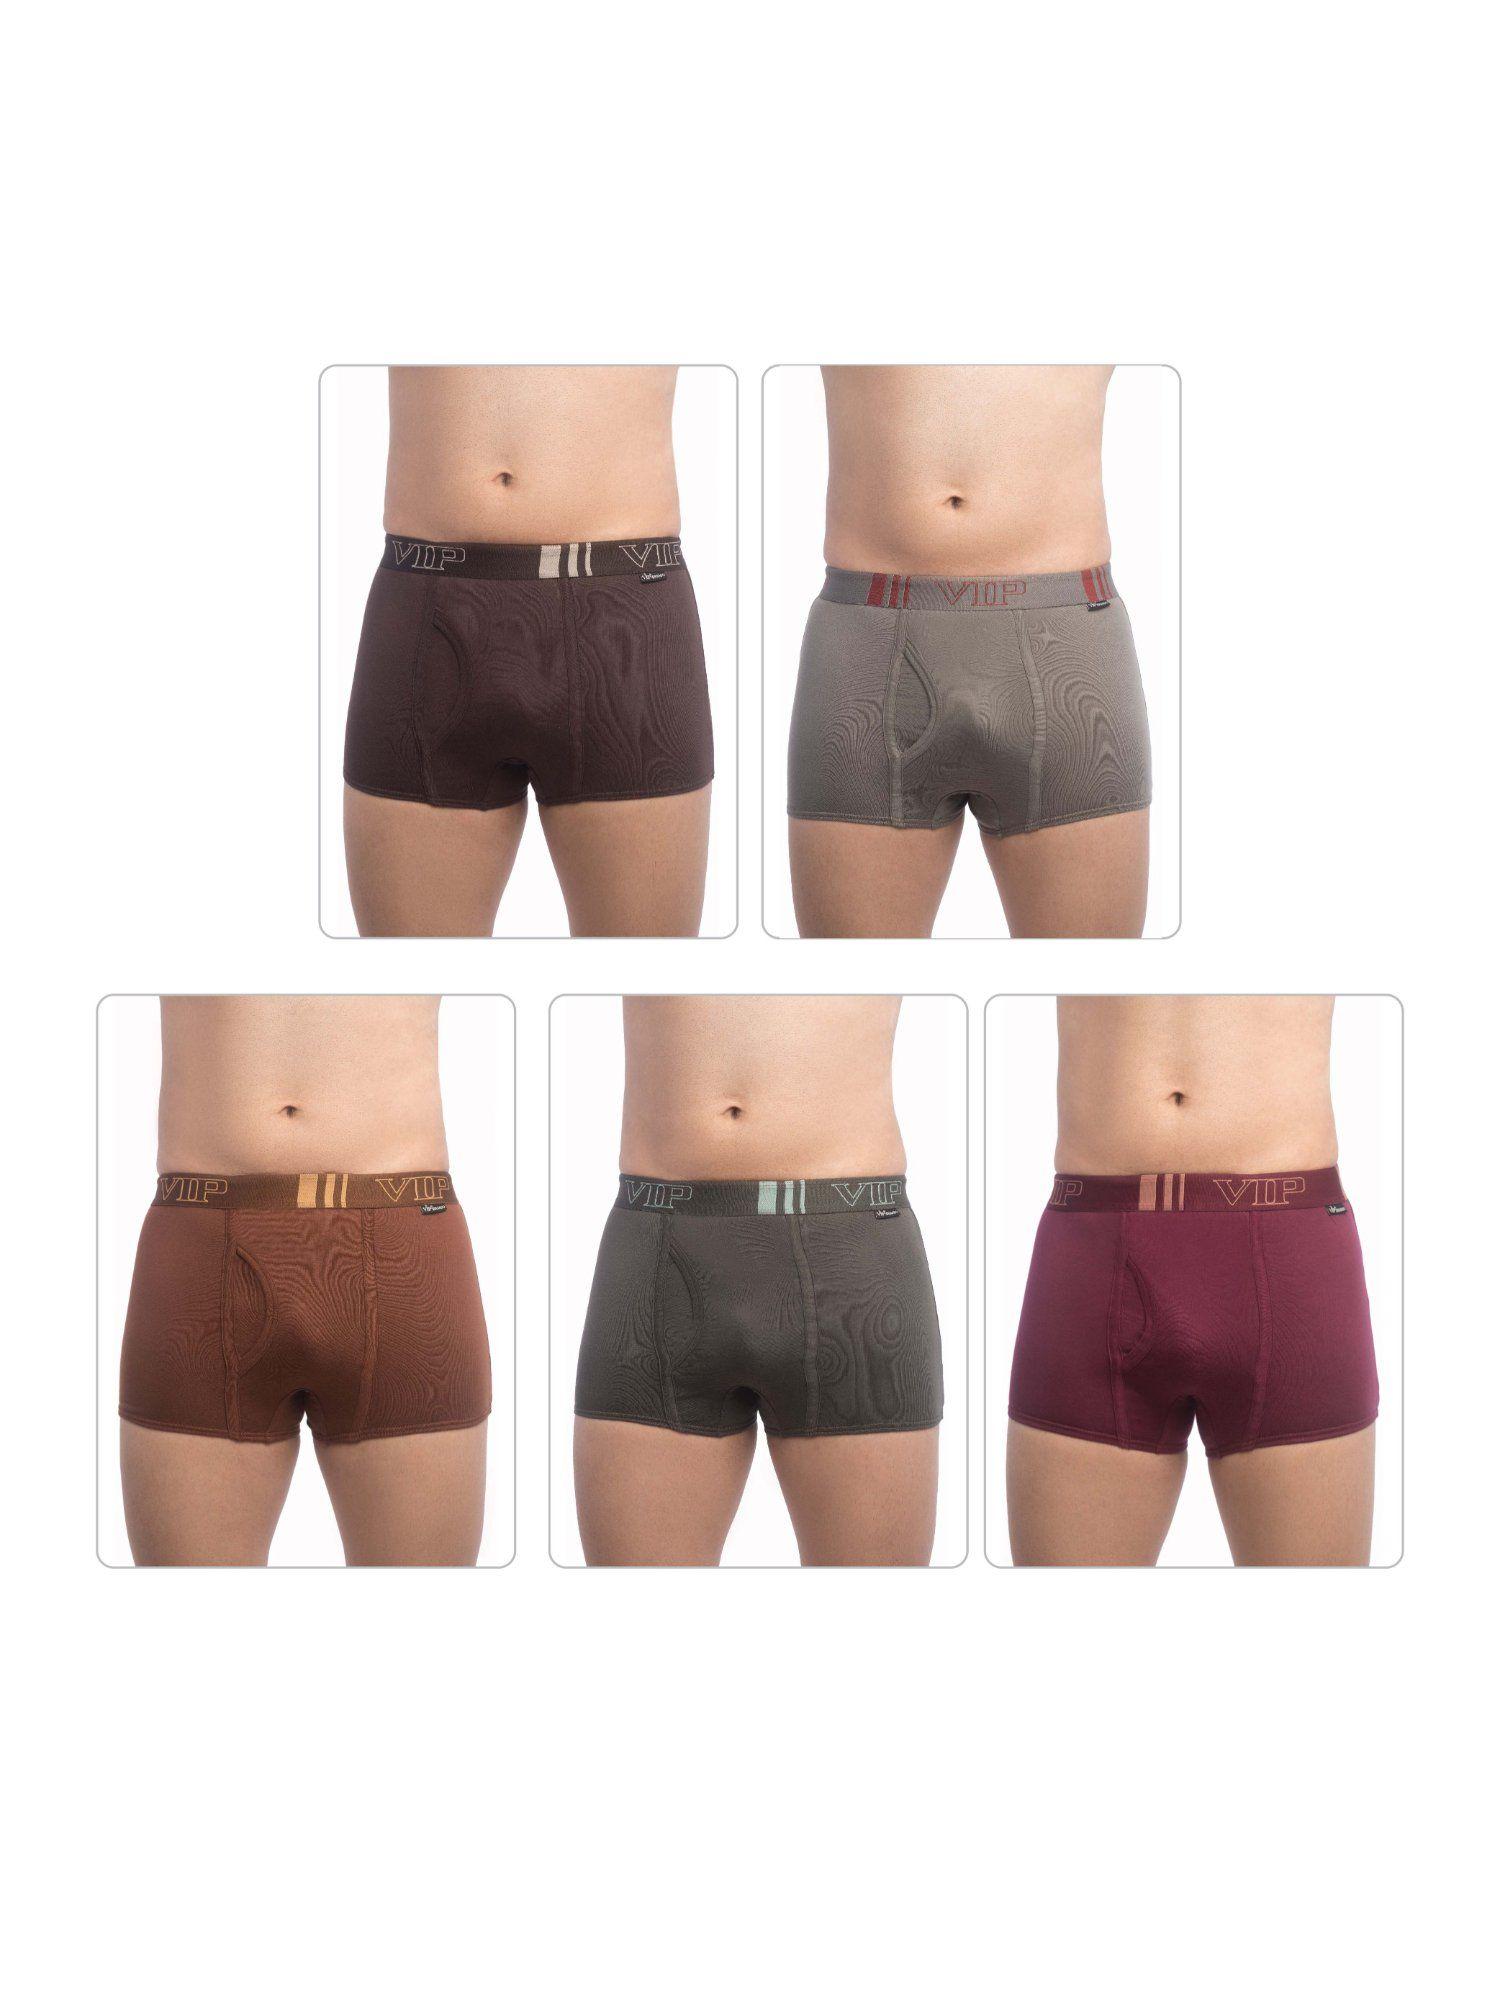 mens cotton brando plain trunks, colors & prints may vary (pack of 5)